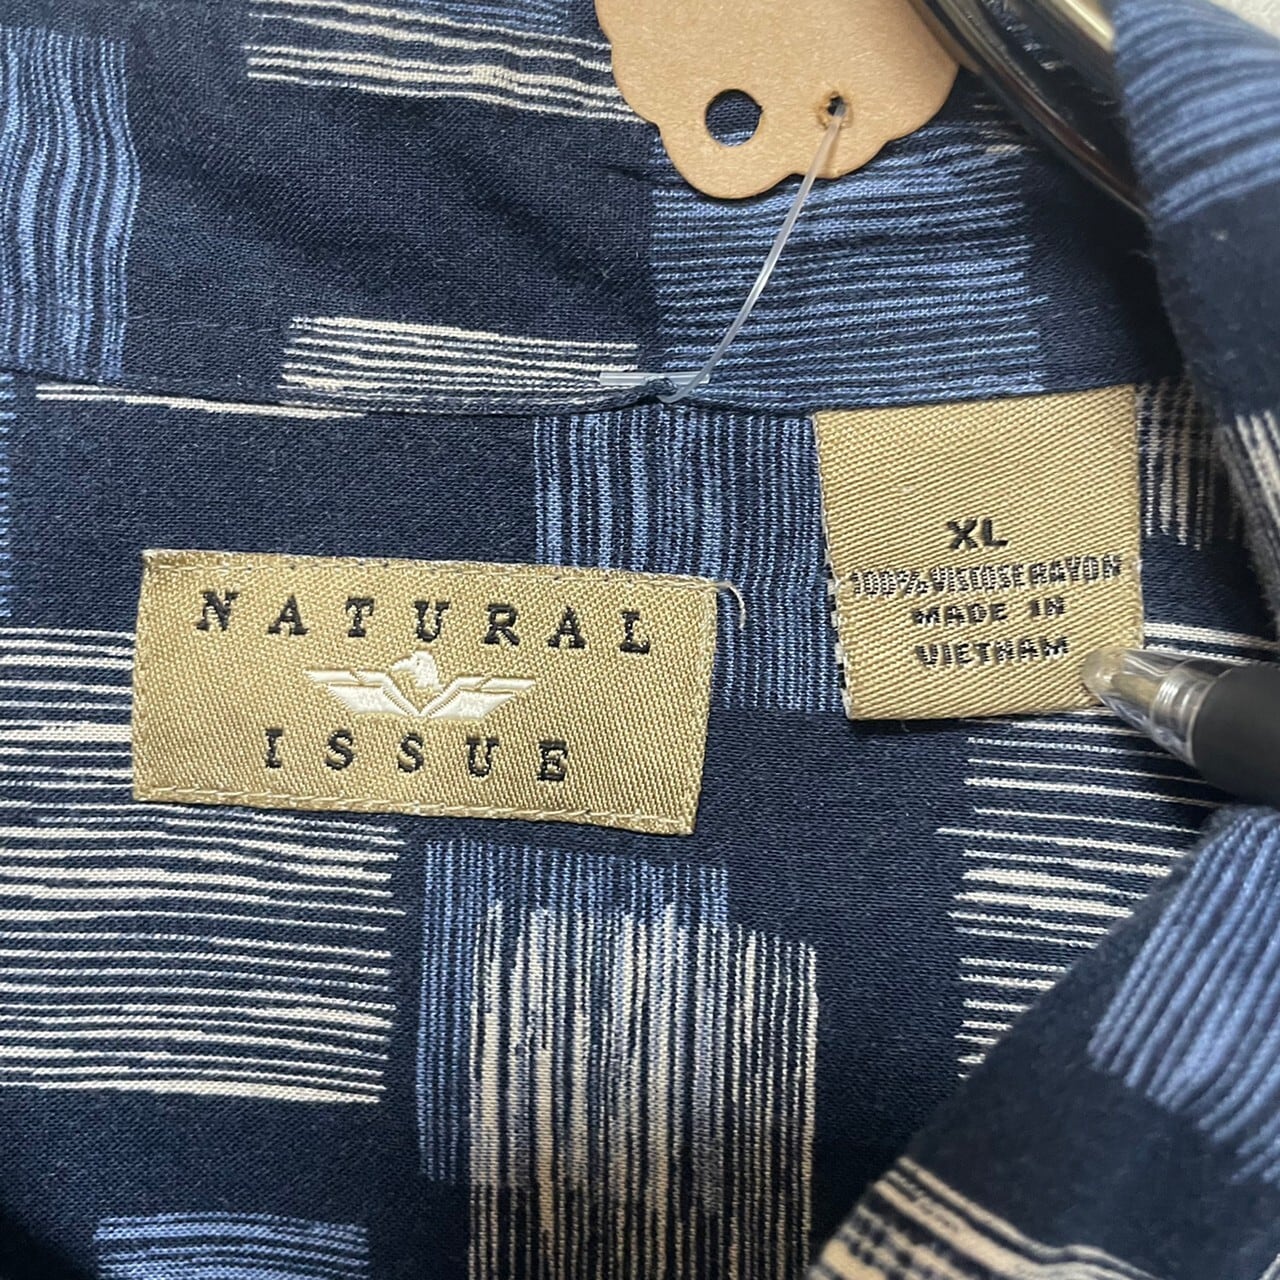 NATURAL ISSUE 半袖柄シャツ XL レーヨン100% | 古着屋OLDGREEN